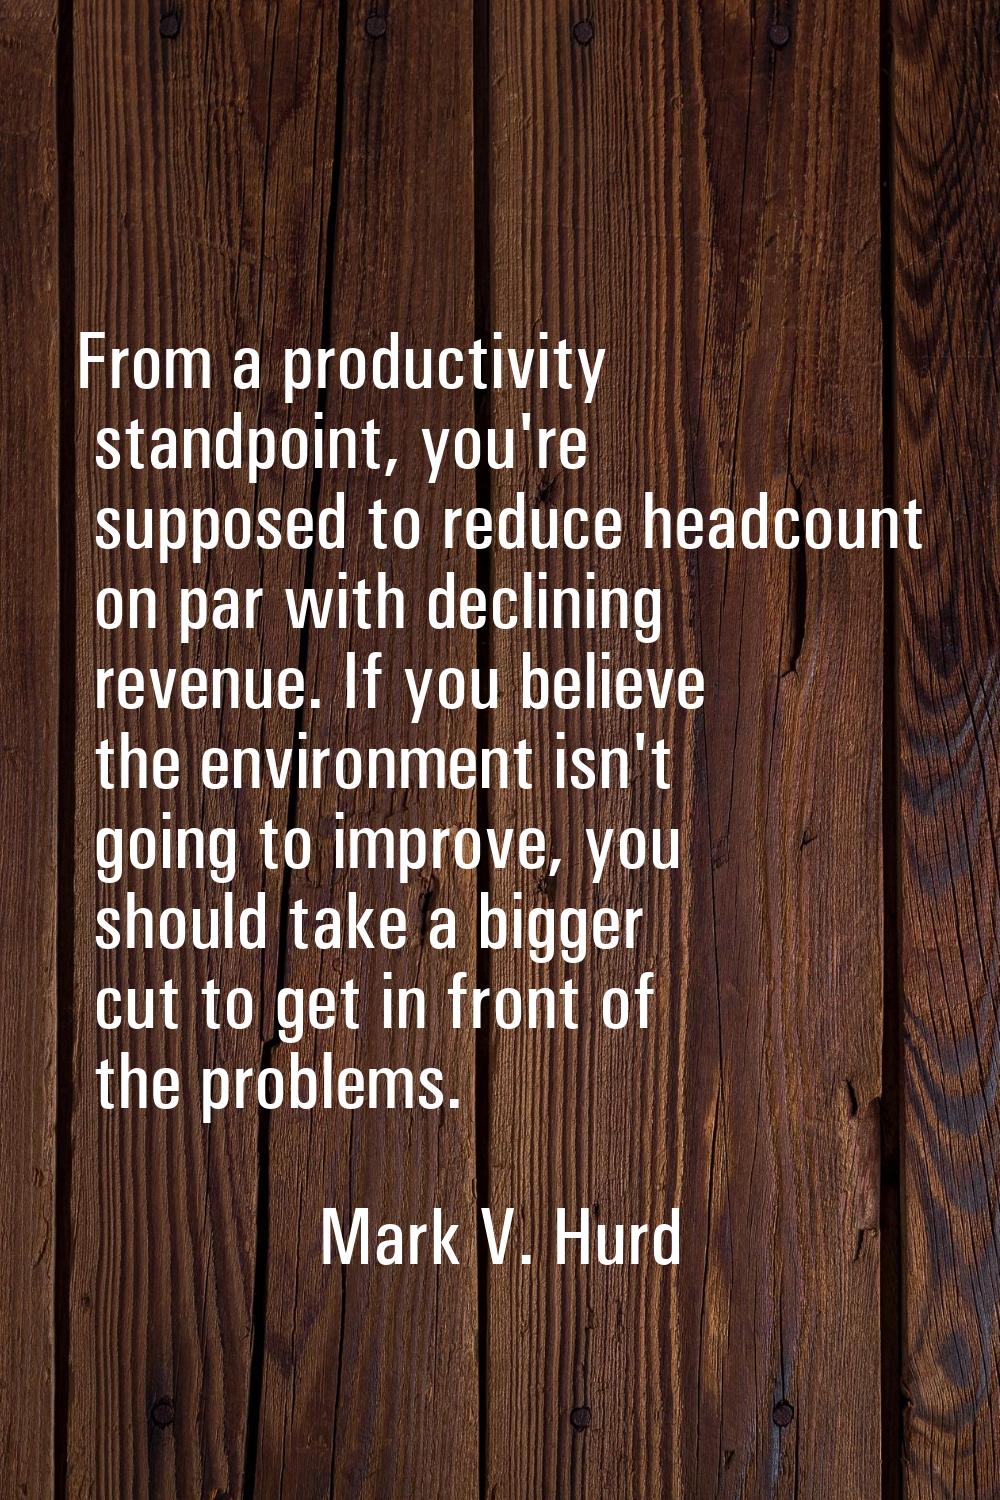 From a productivity standpoint, you're supposed to reduce headcount on par with declining revenue. 